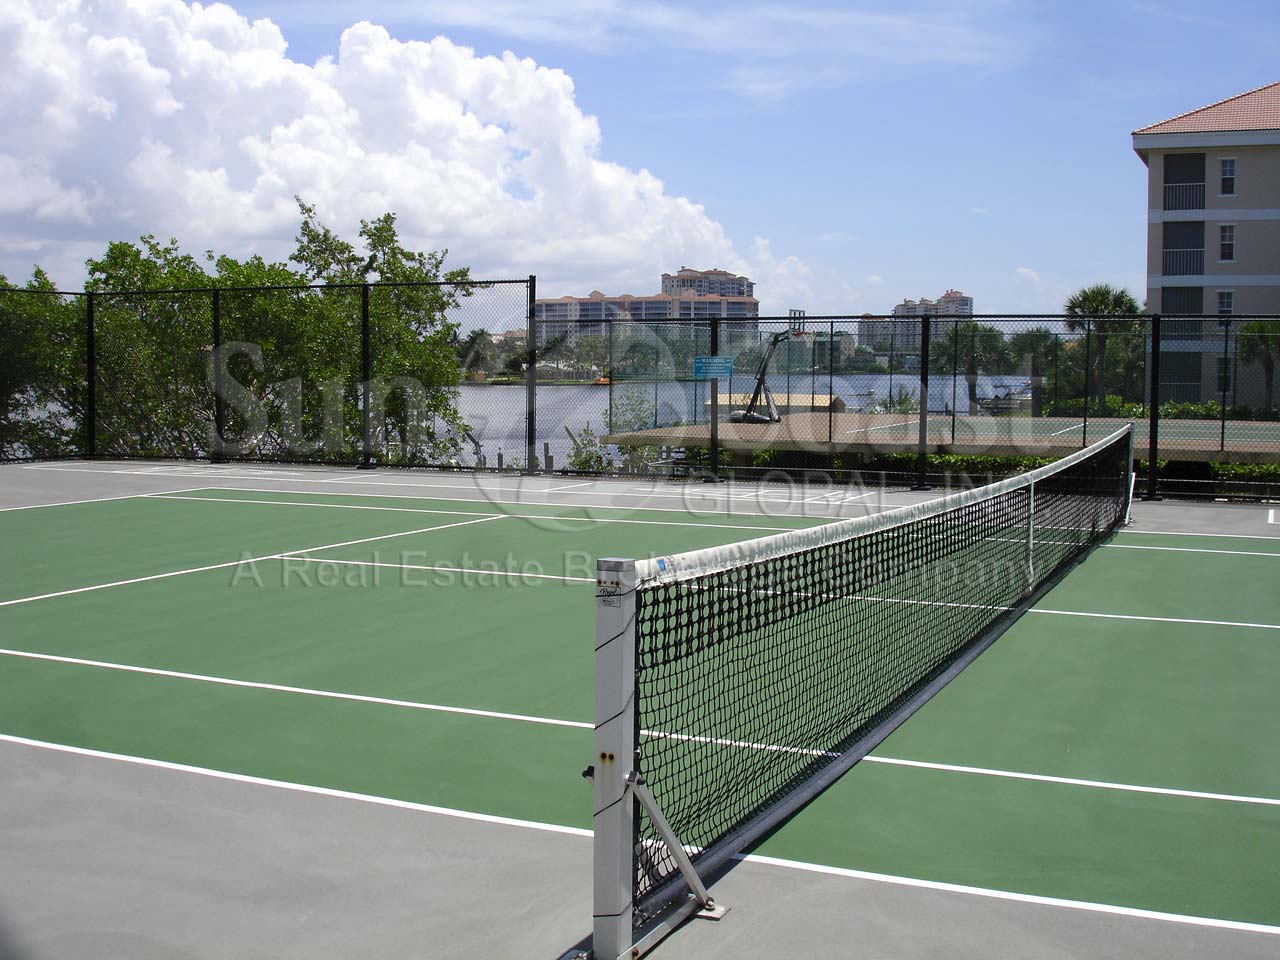 Le Dauphin Tennis Courts